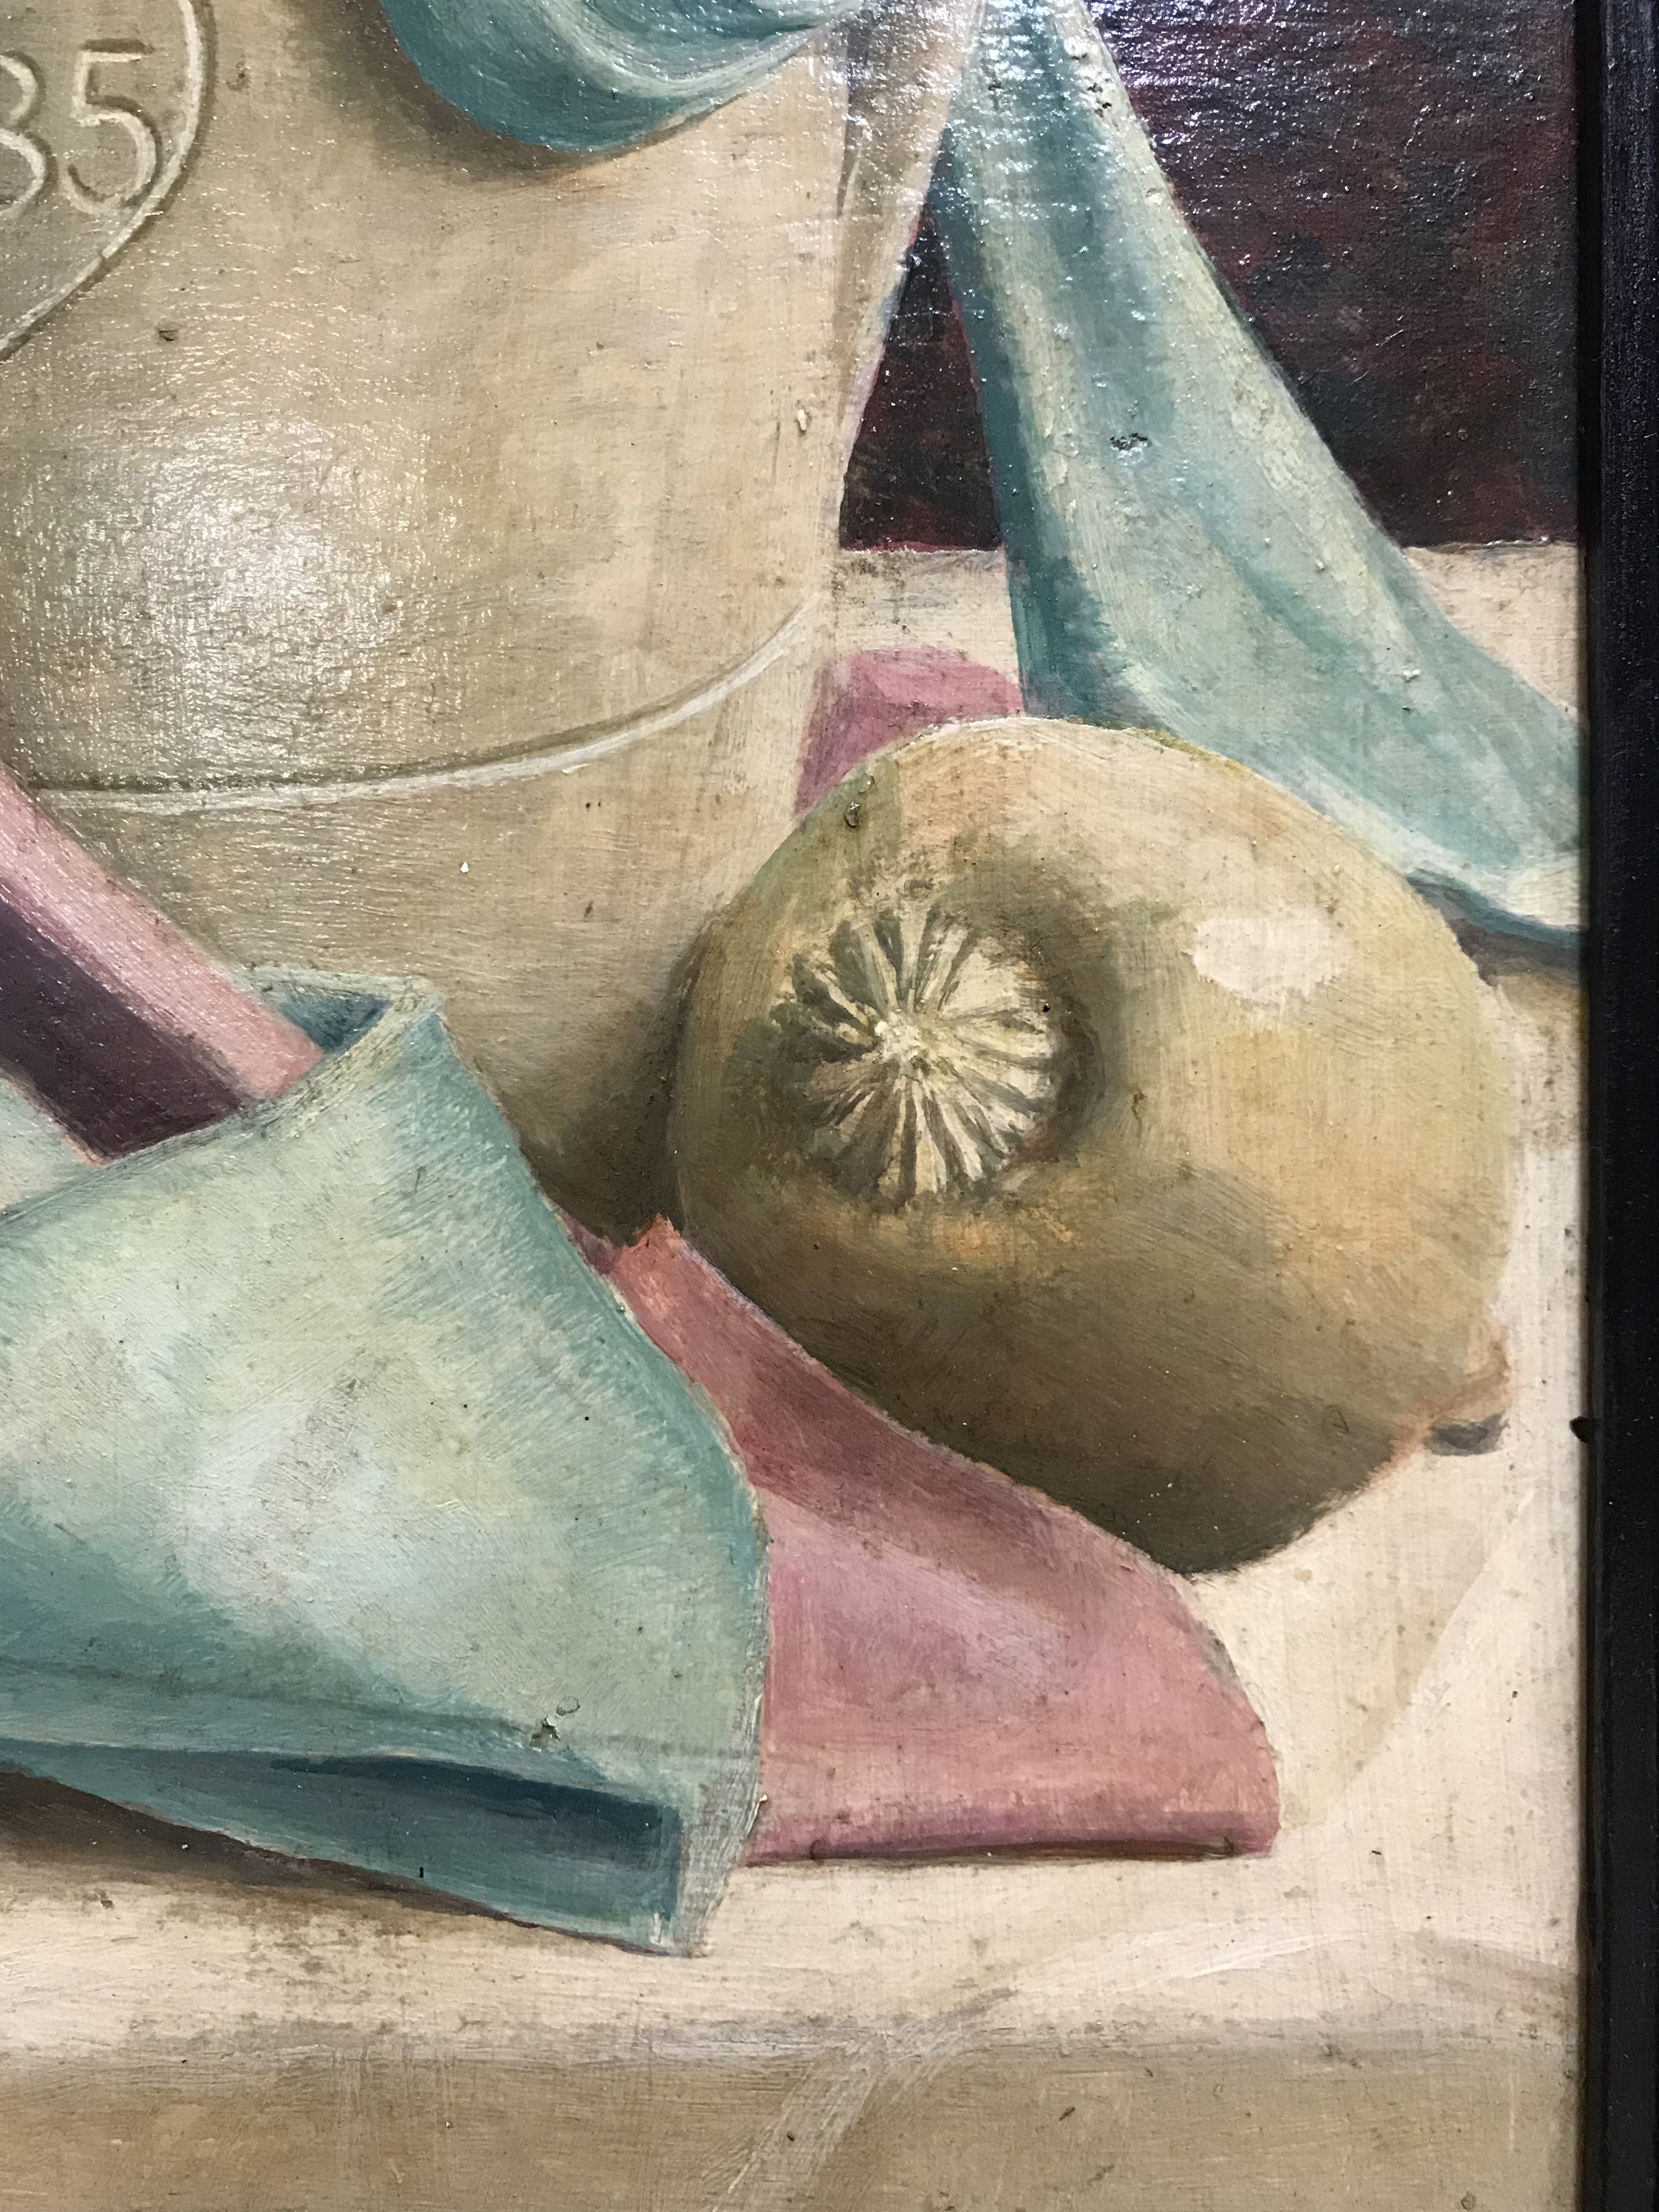 Arthur Harry Kidd 1931-2003. English. Oil on board. “Still Life of a Bowl and Fruit”. - Image 2 of 4